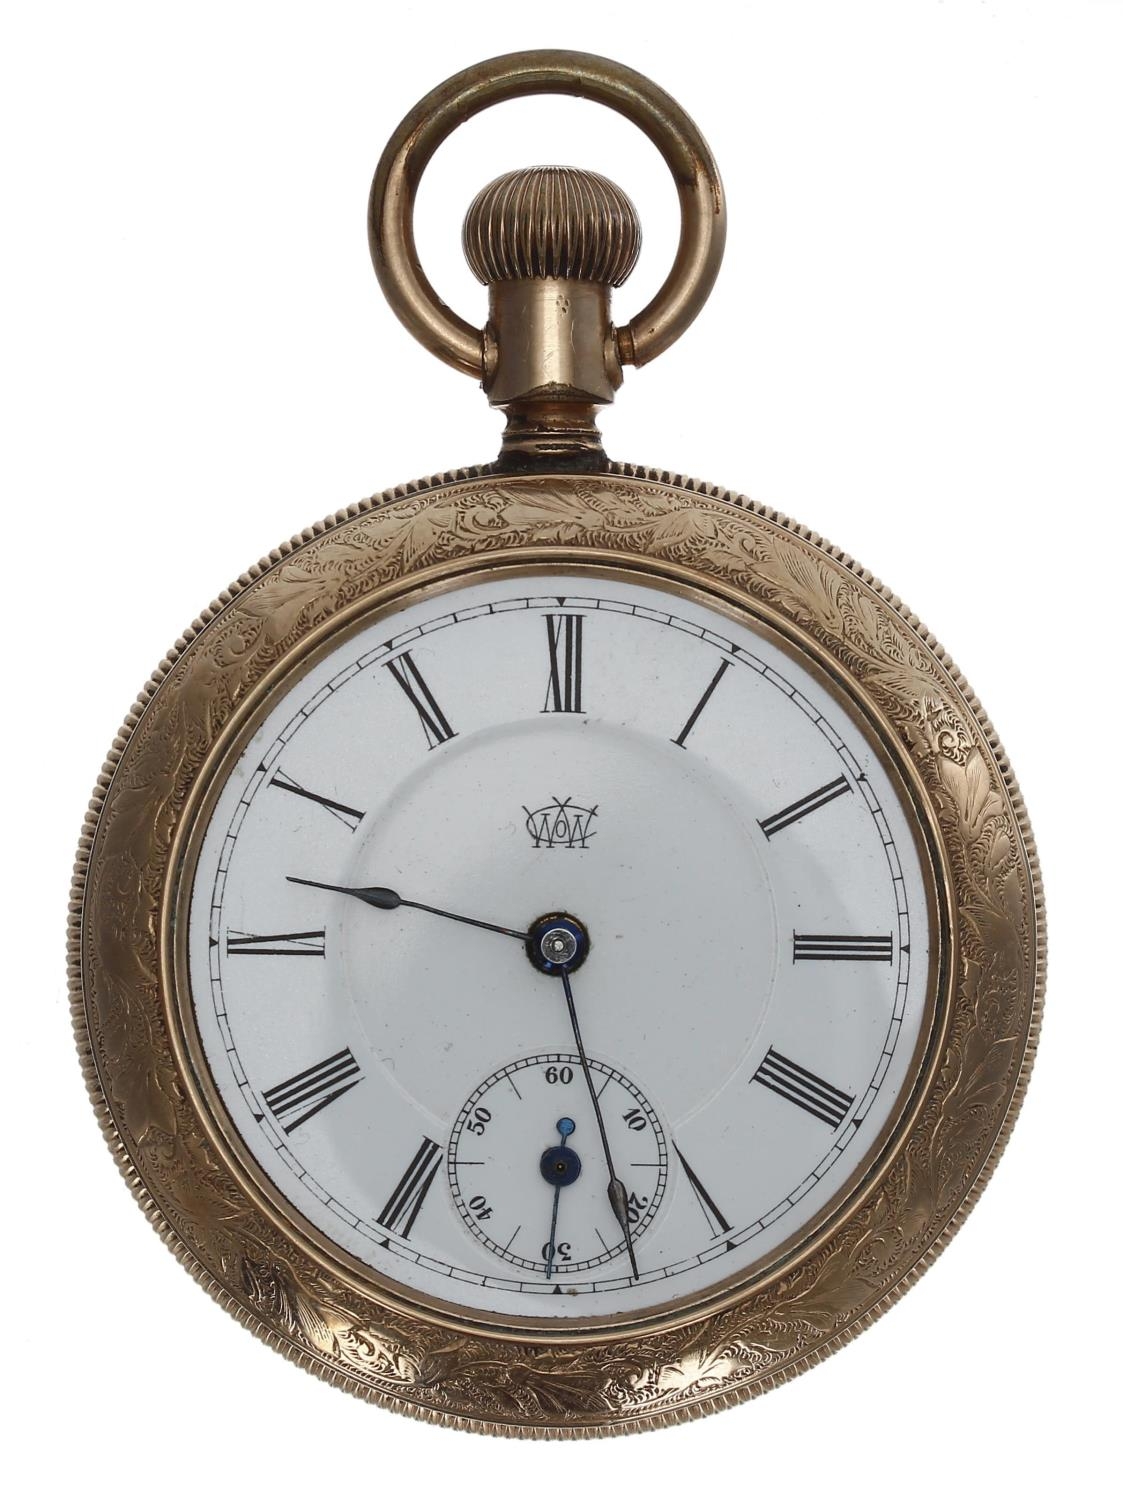 Waterbury Watch Co. Addison Series K duplex gold plated pocket watch, signed movement, signed